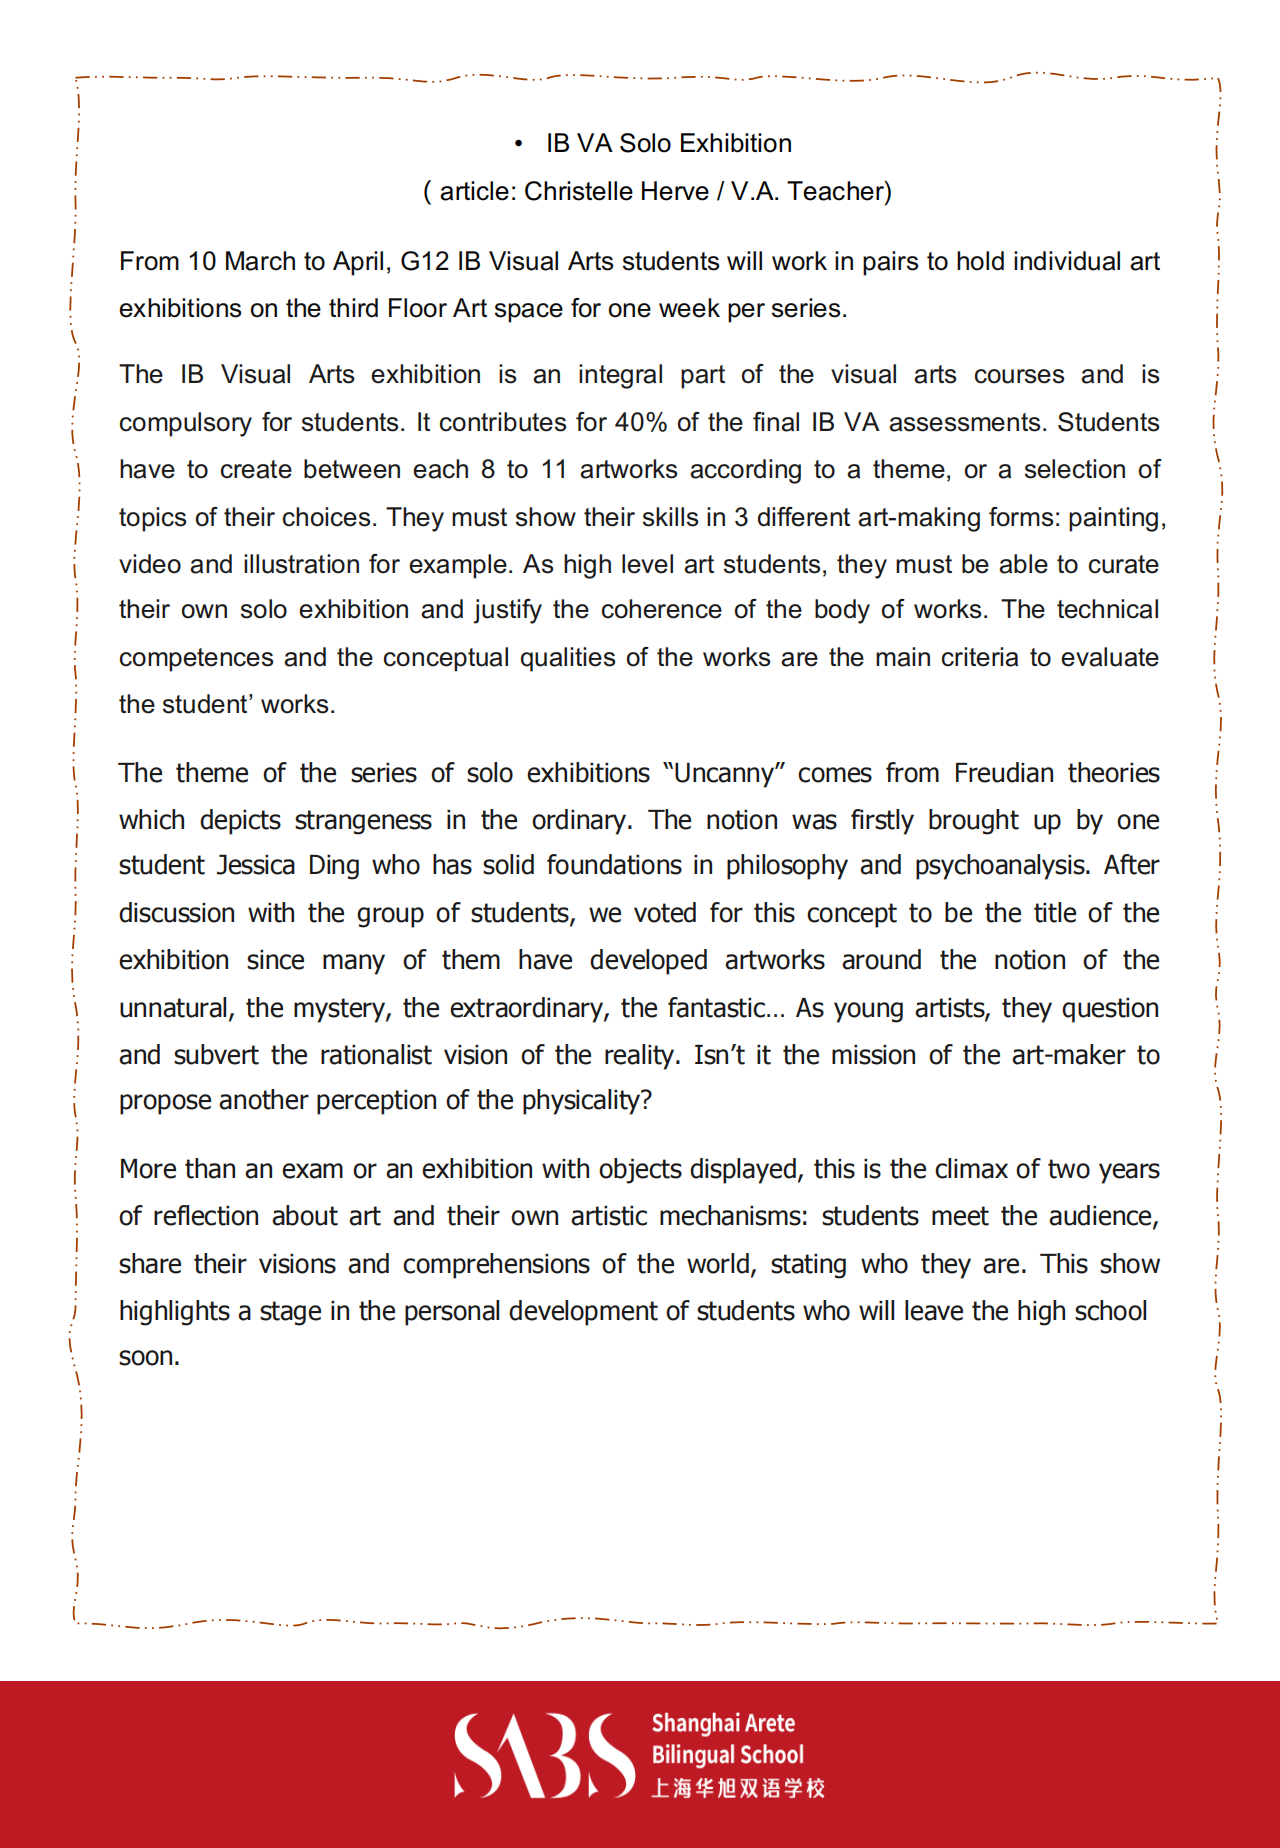 HS 2nd Issue Newsletter pptx（英文）_15.png